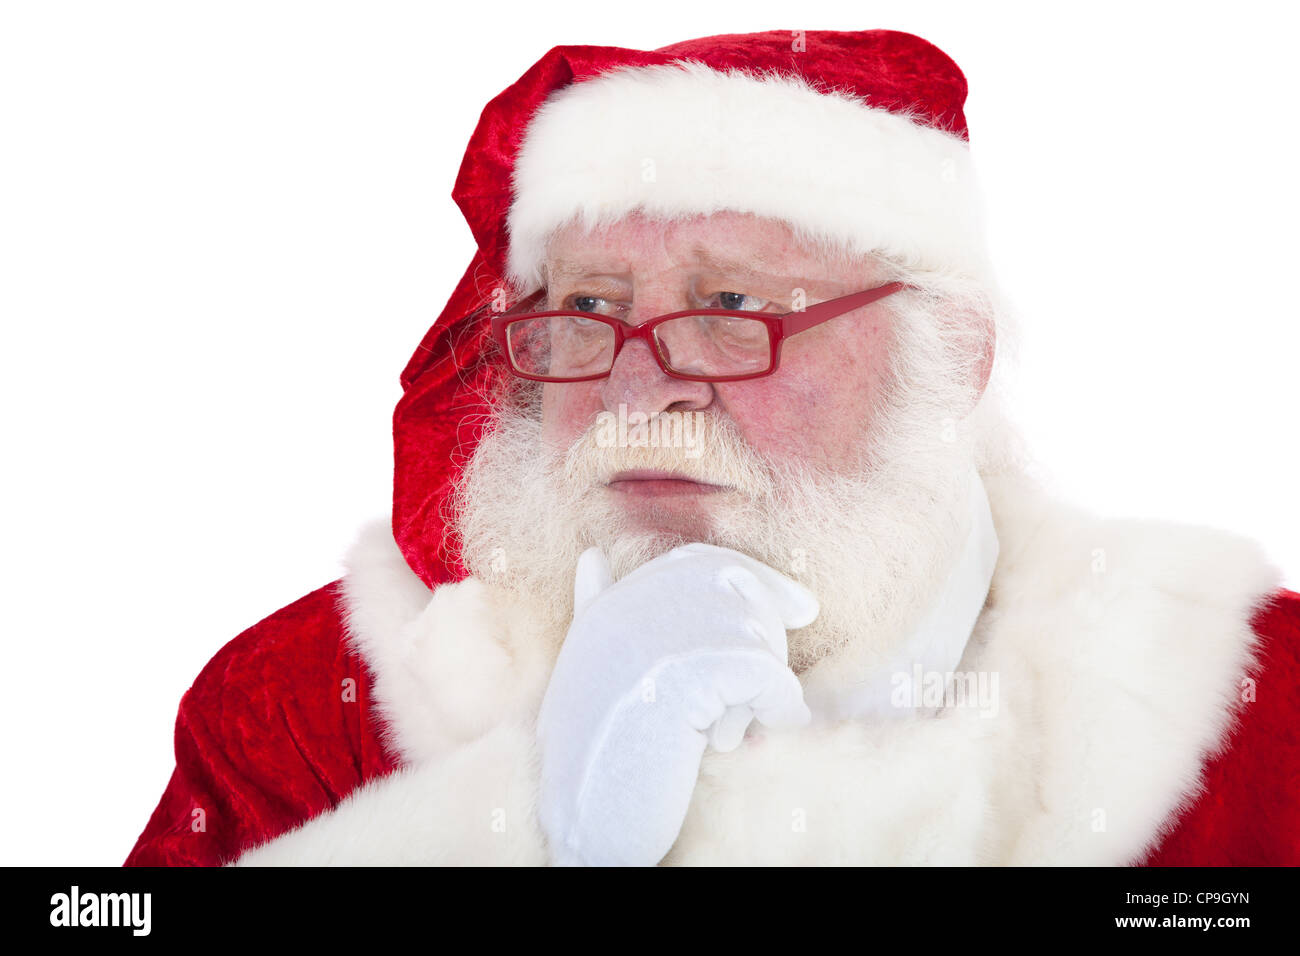 Santa Claus in authentic look deliberates a decision. All on white background. Stock Photo